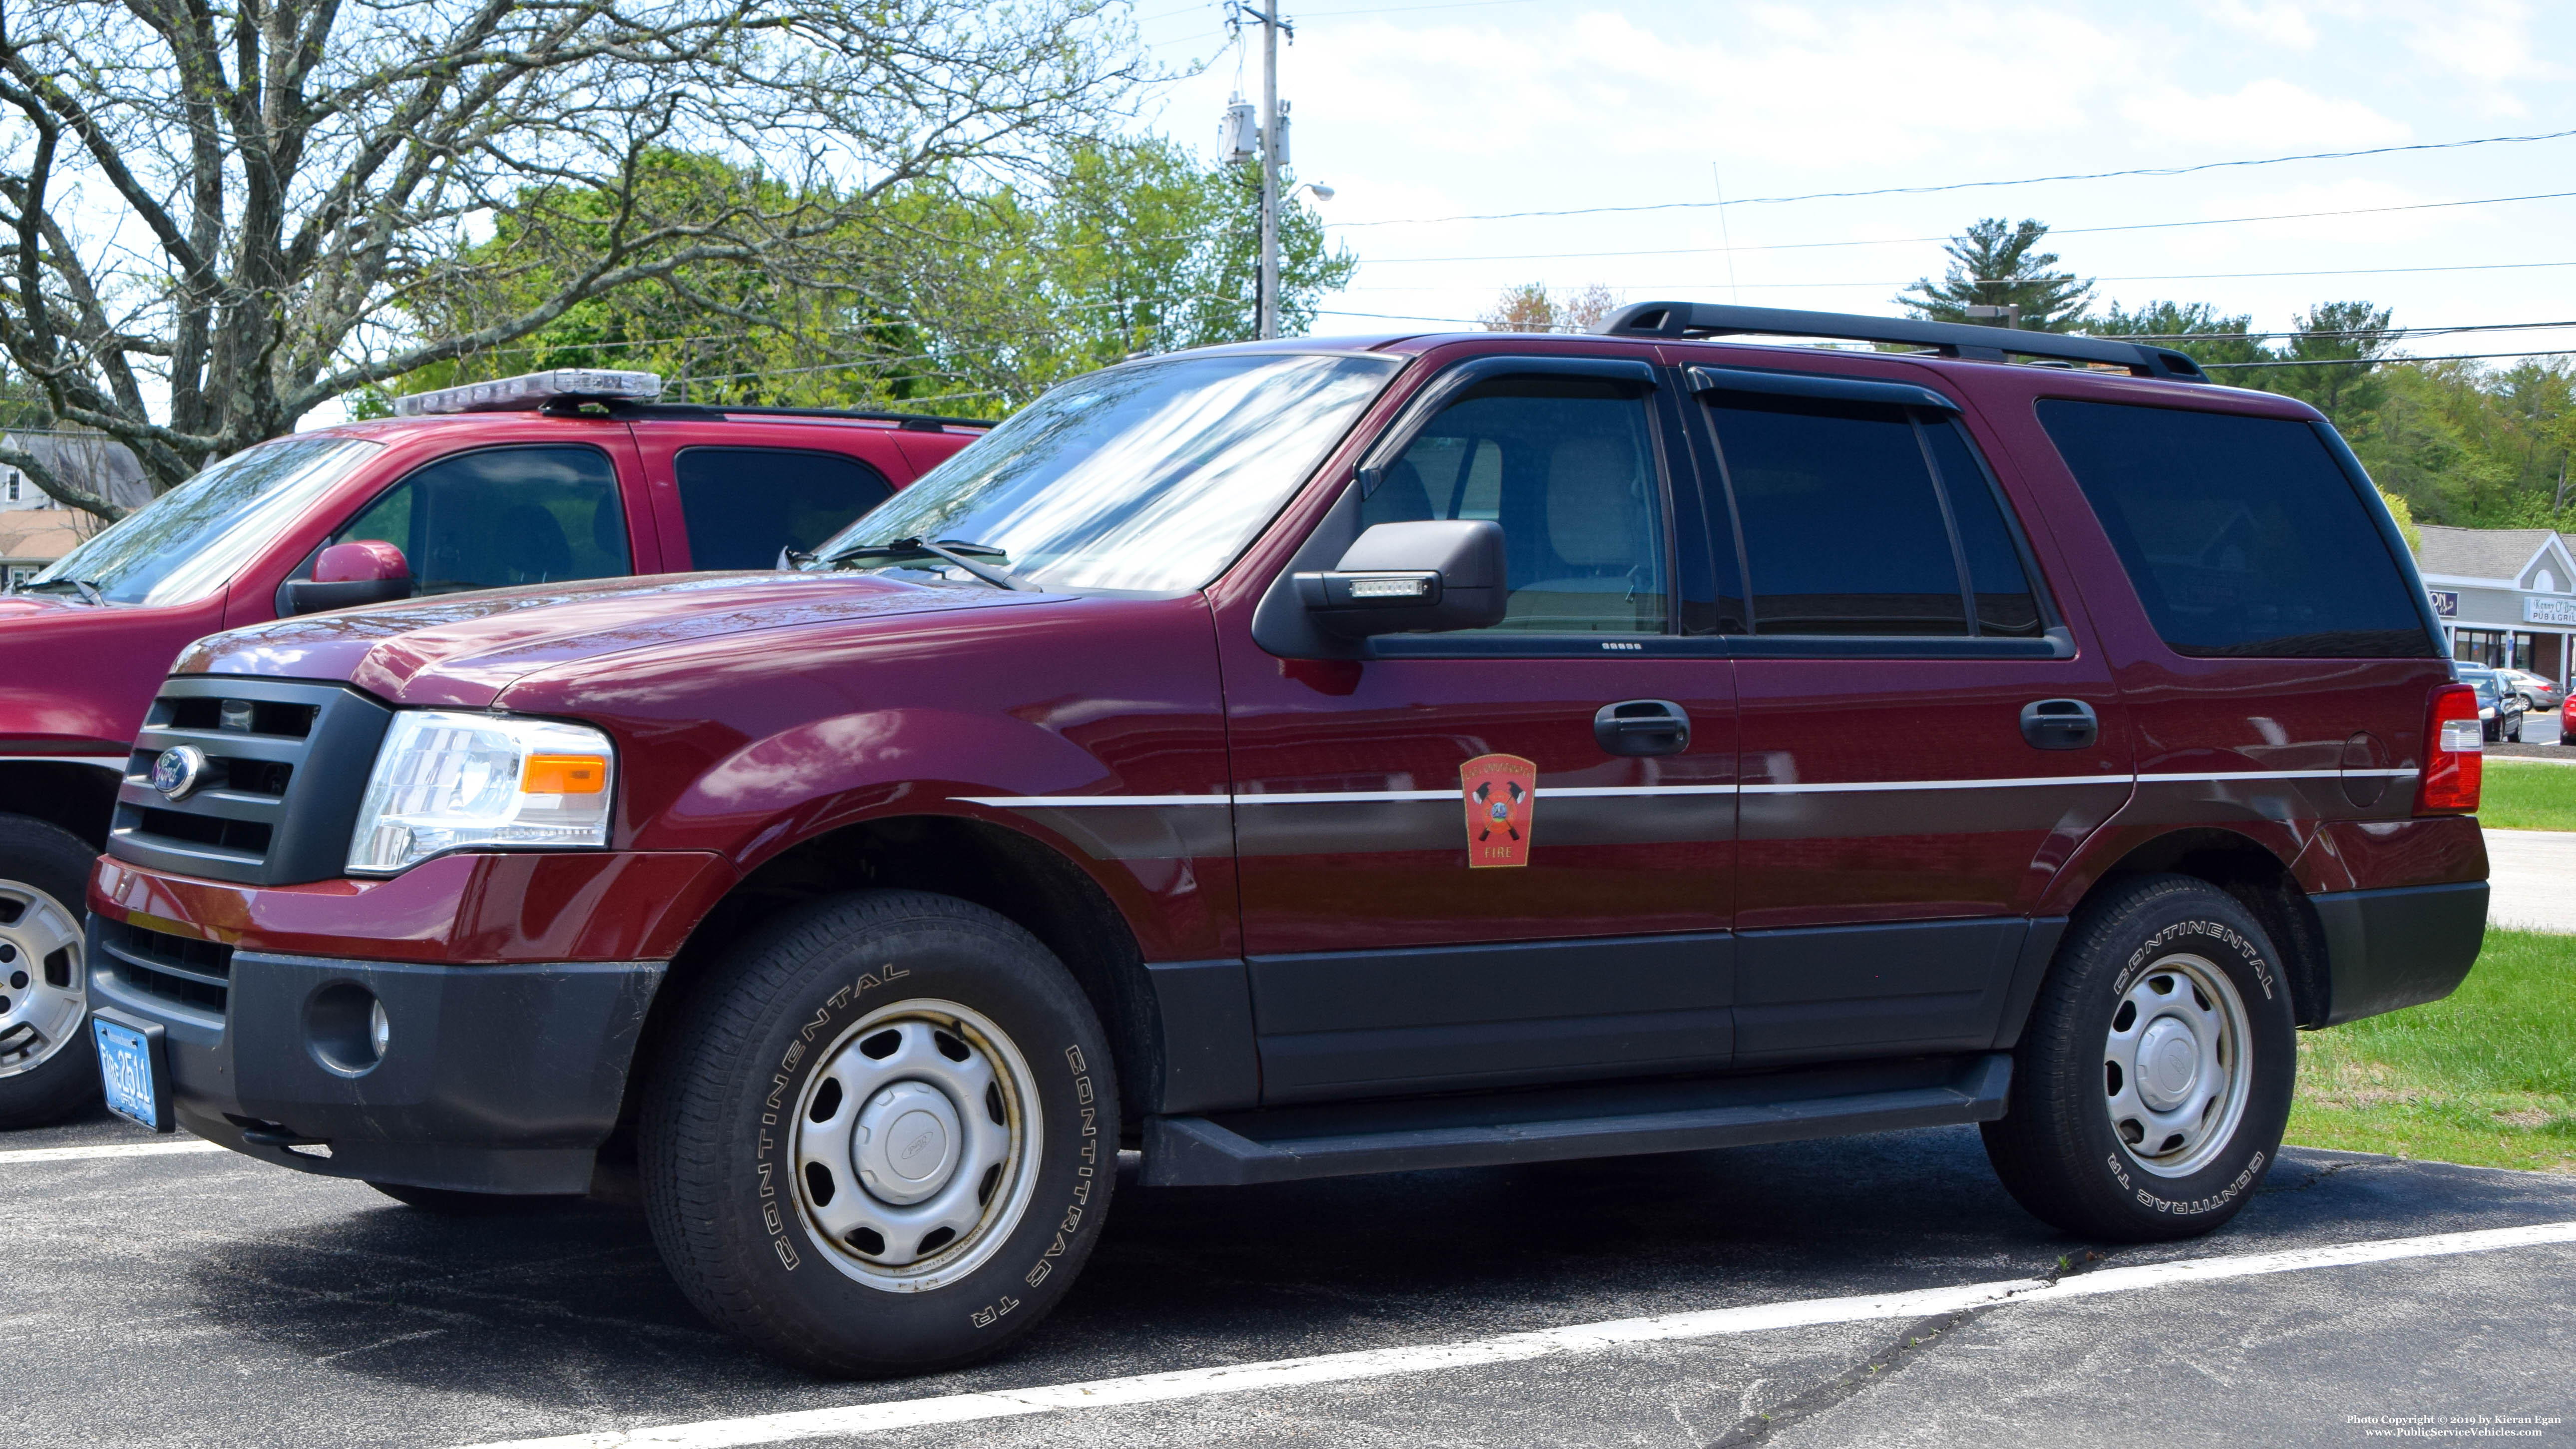 A photo  of East Bridgewater Fire
            Car 2, a 2013 Ford Expedition             taken by Kieran Egan